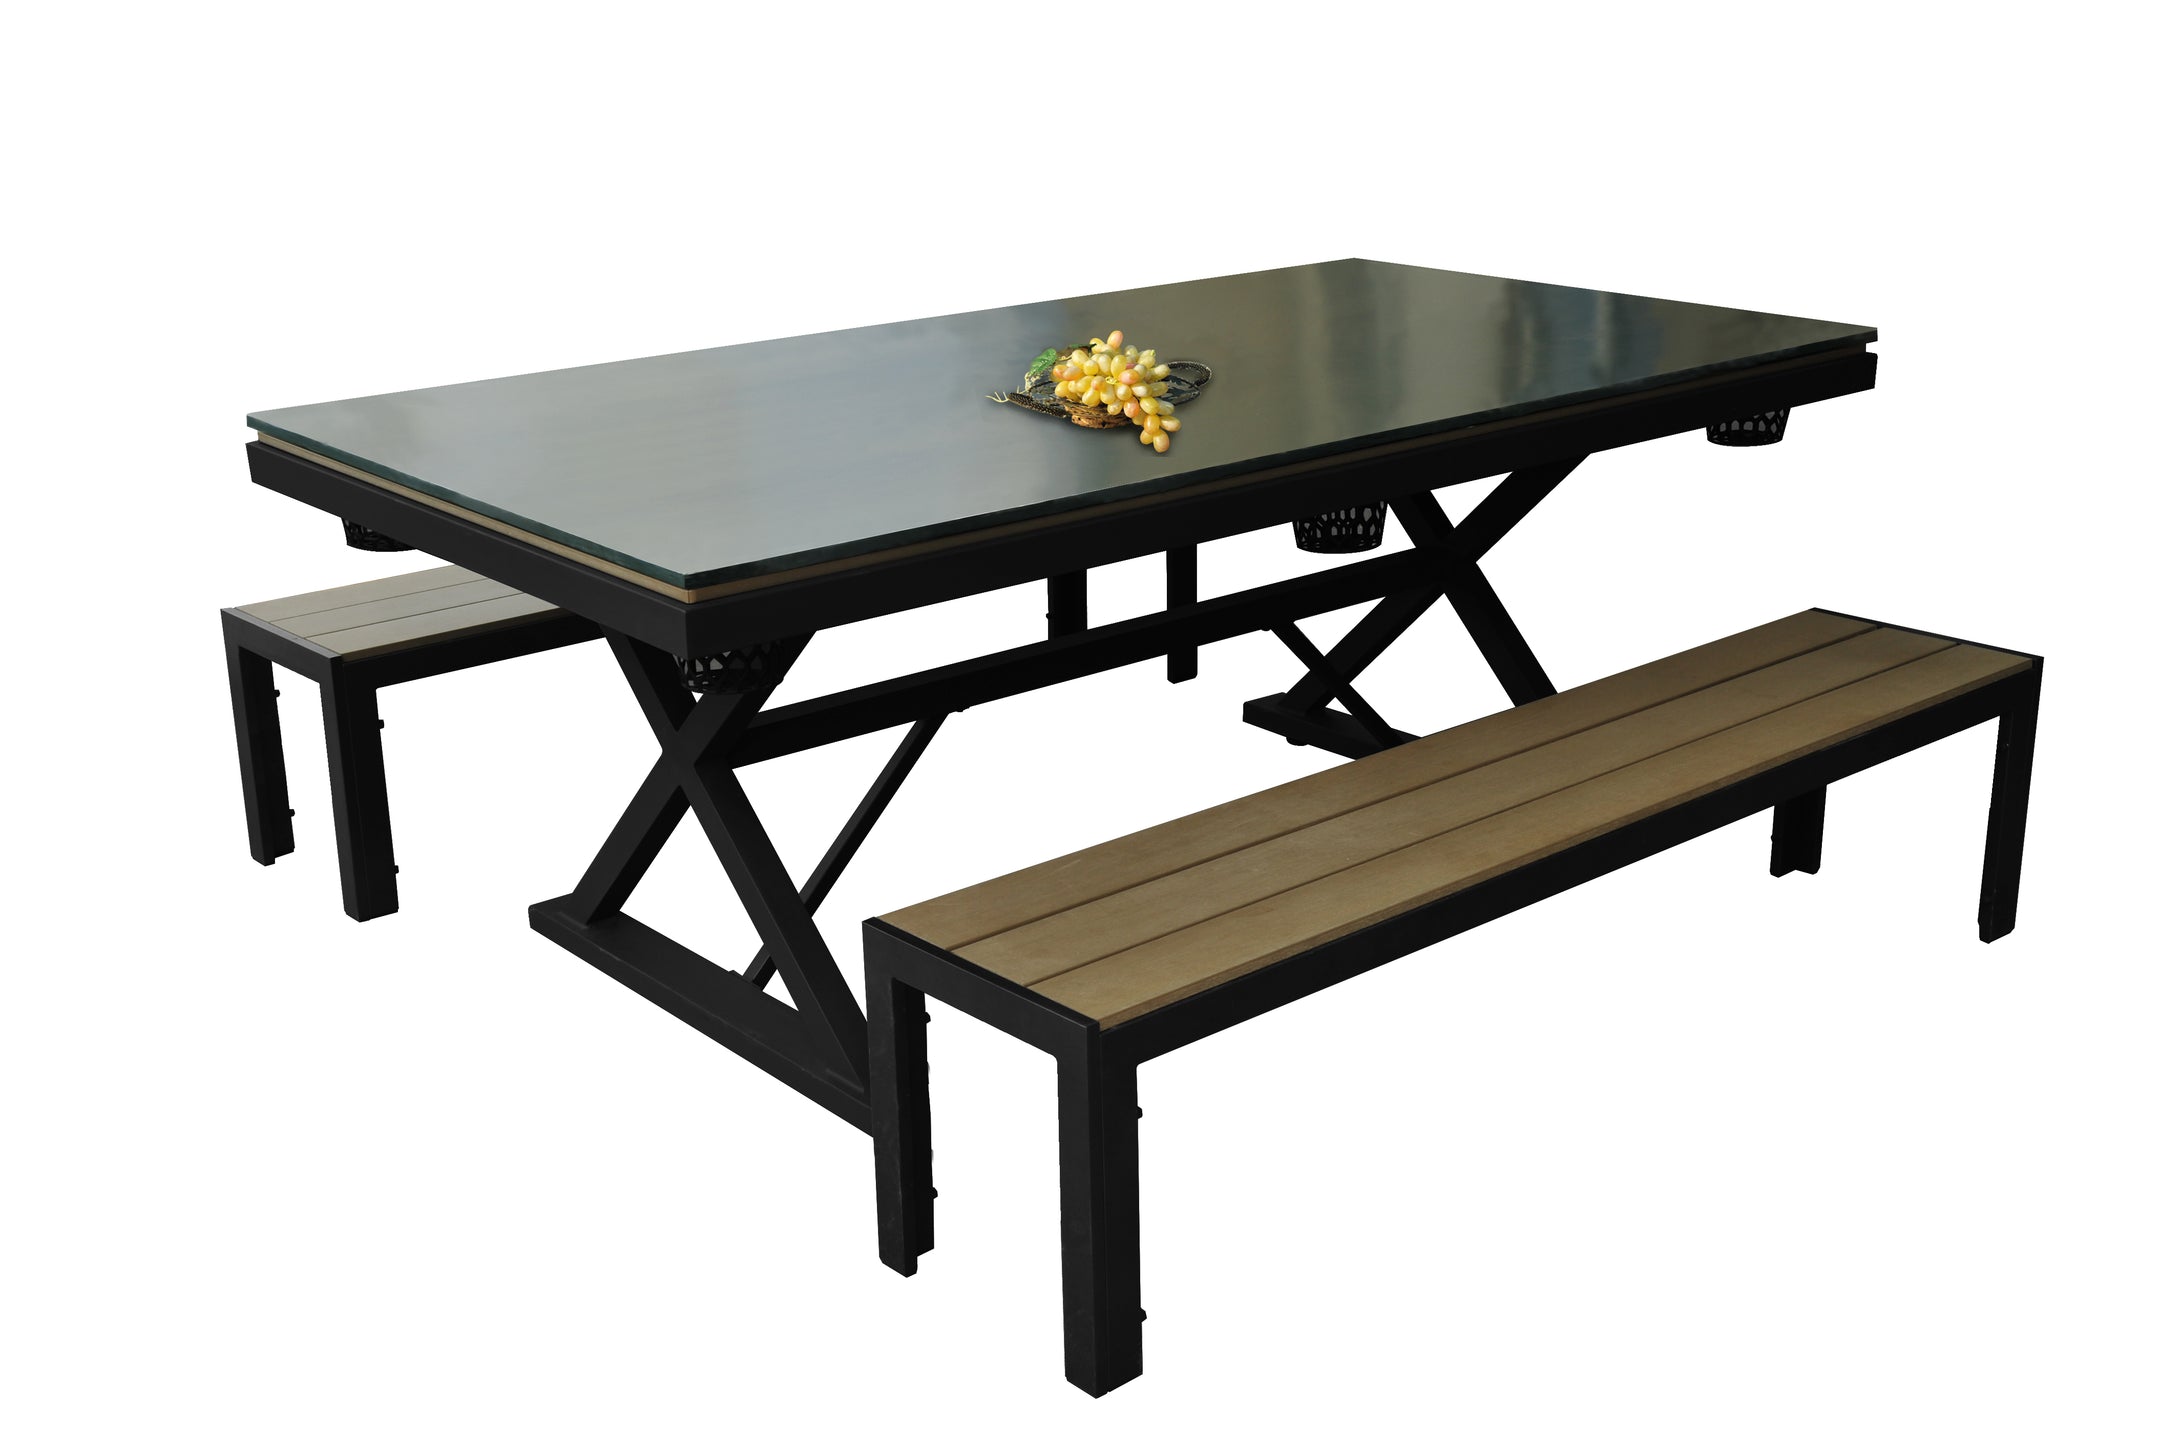 Airzone Outdoor Play 7' Multi-Use Billiard Table with Bench Seating